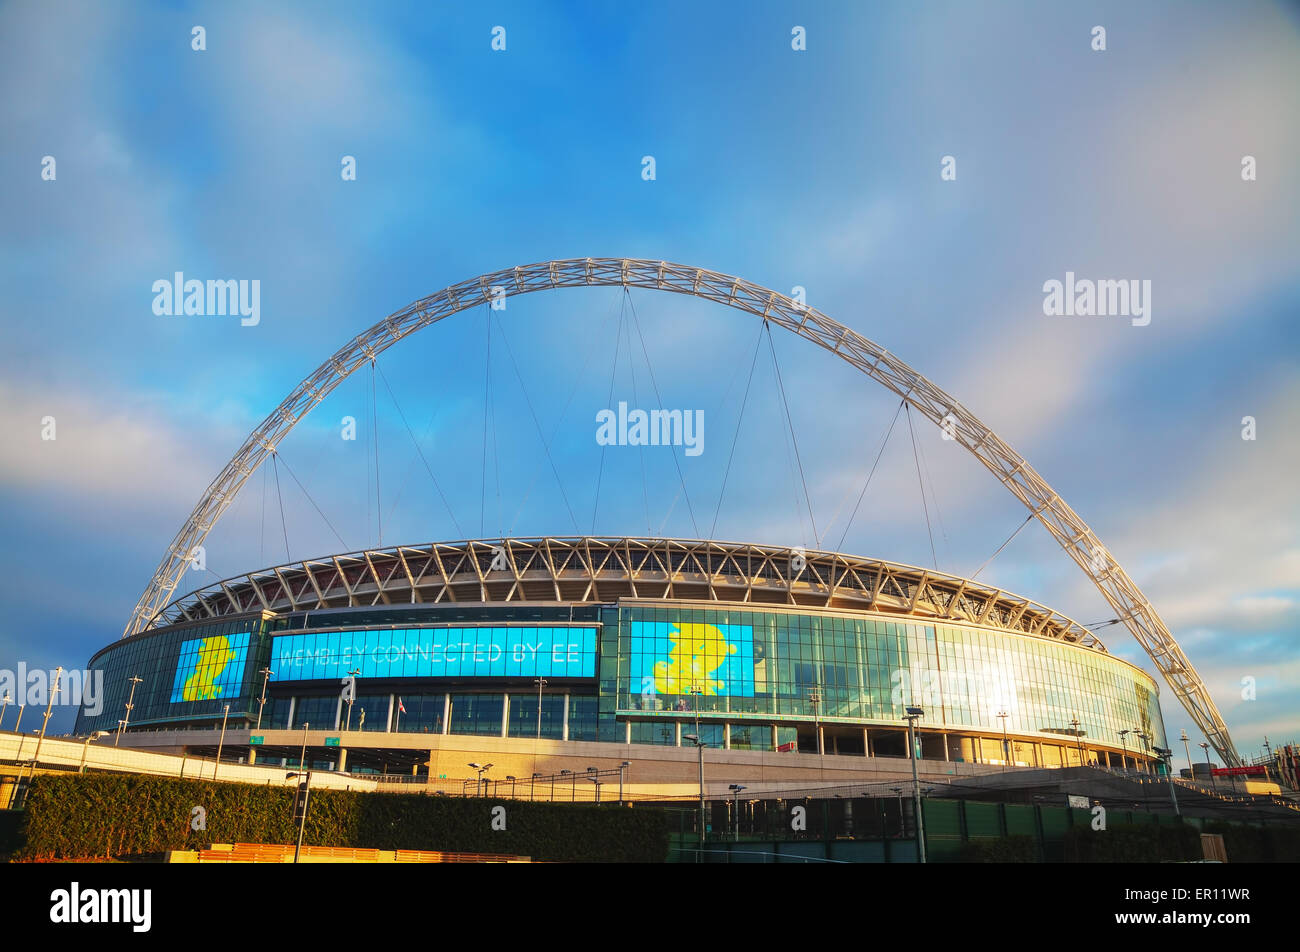 LONDON - APRIL 6: Wembley stadium on April 6, 2015 in London, UK. It's a football stadium in Wembley Park, which opened in 2007 Stock Photo